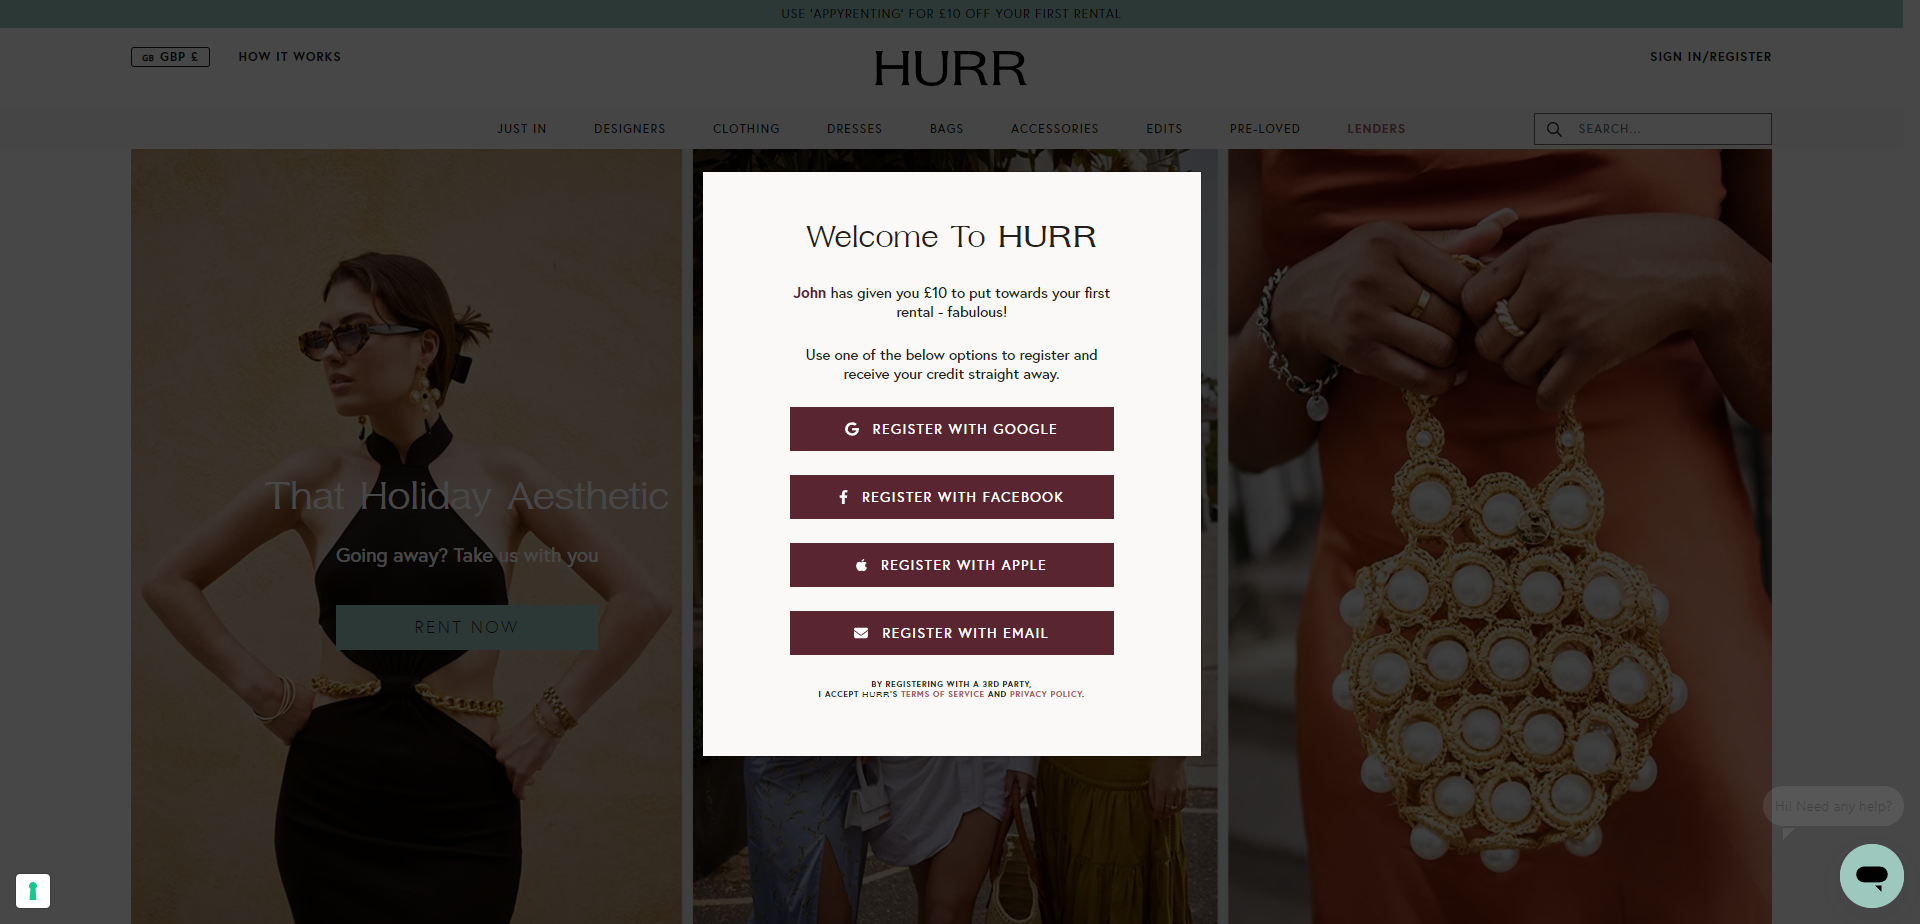 Landing Page for Hurr Collective